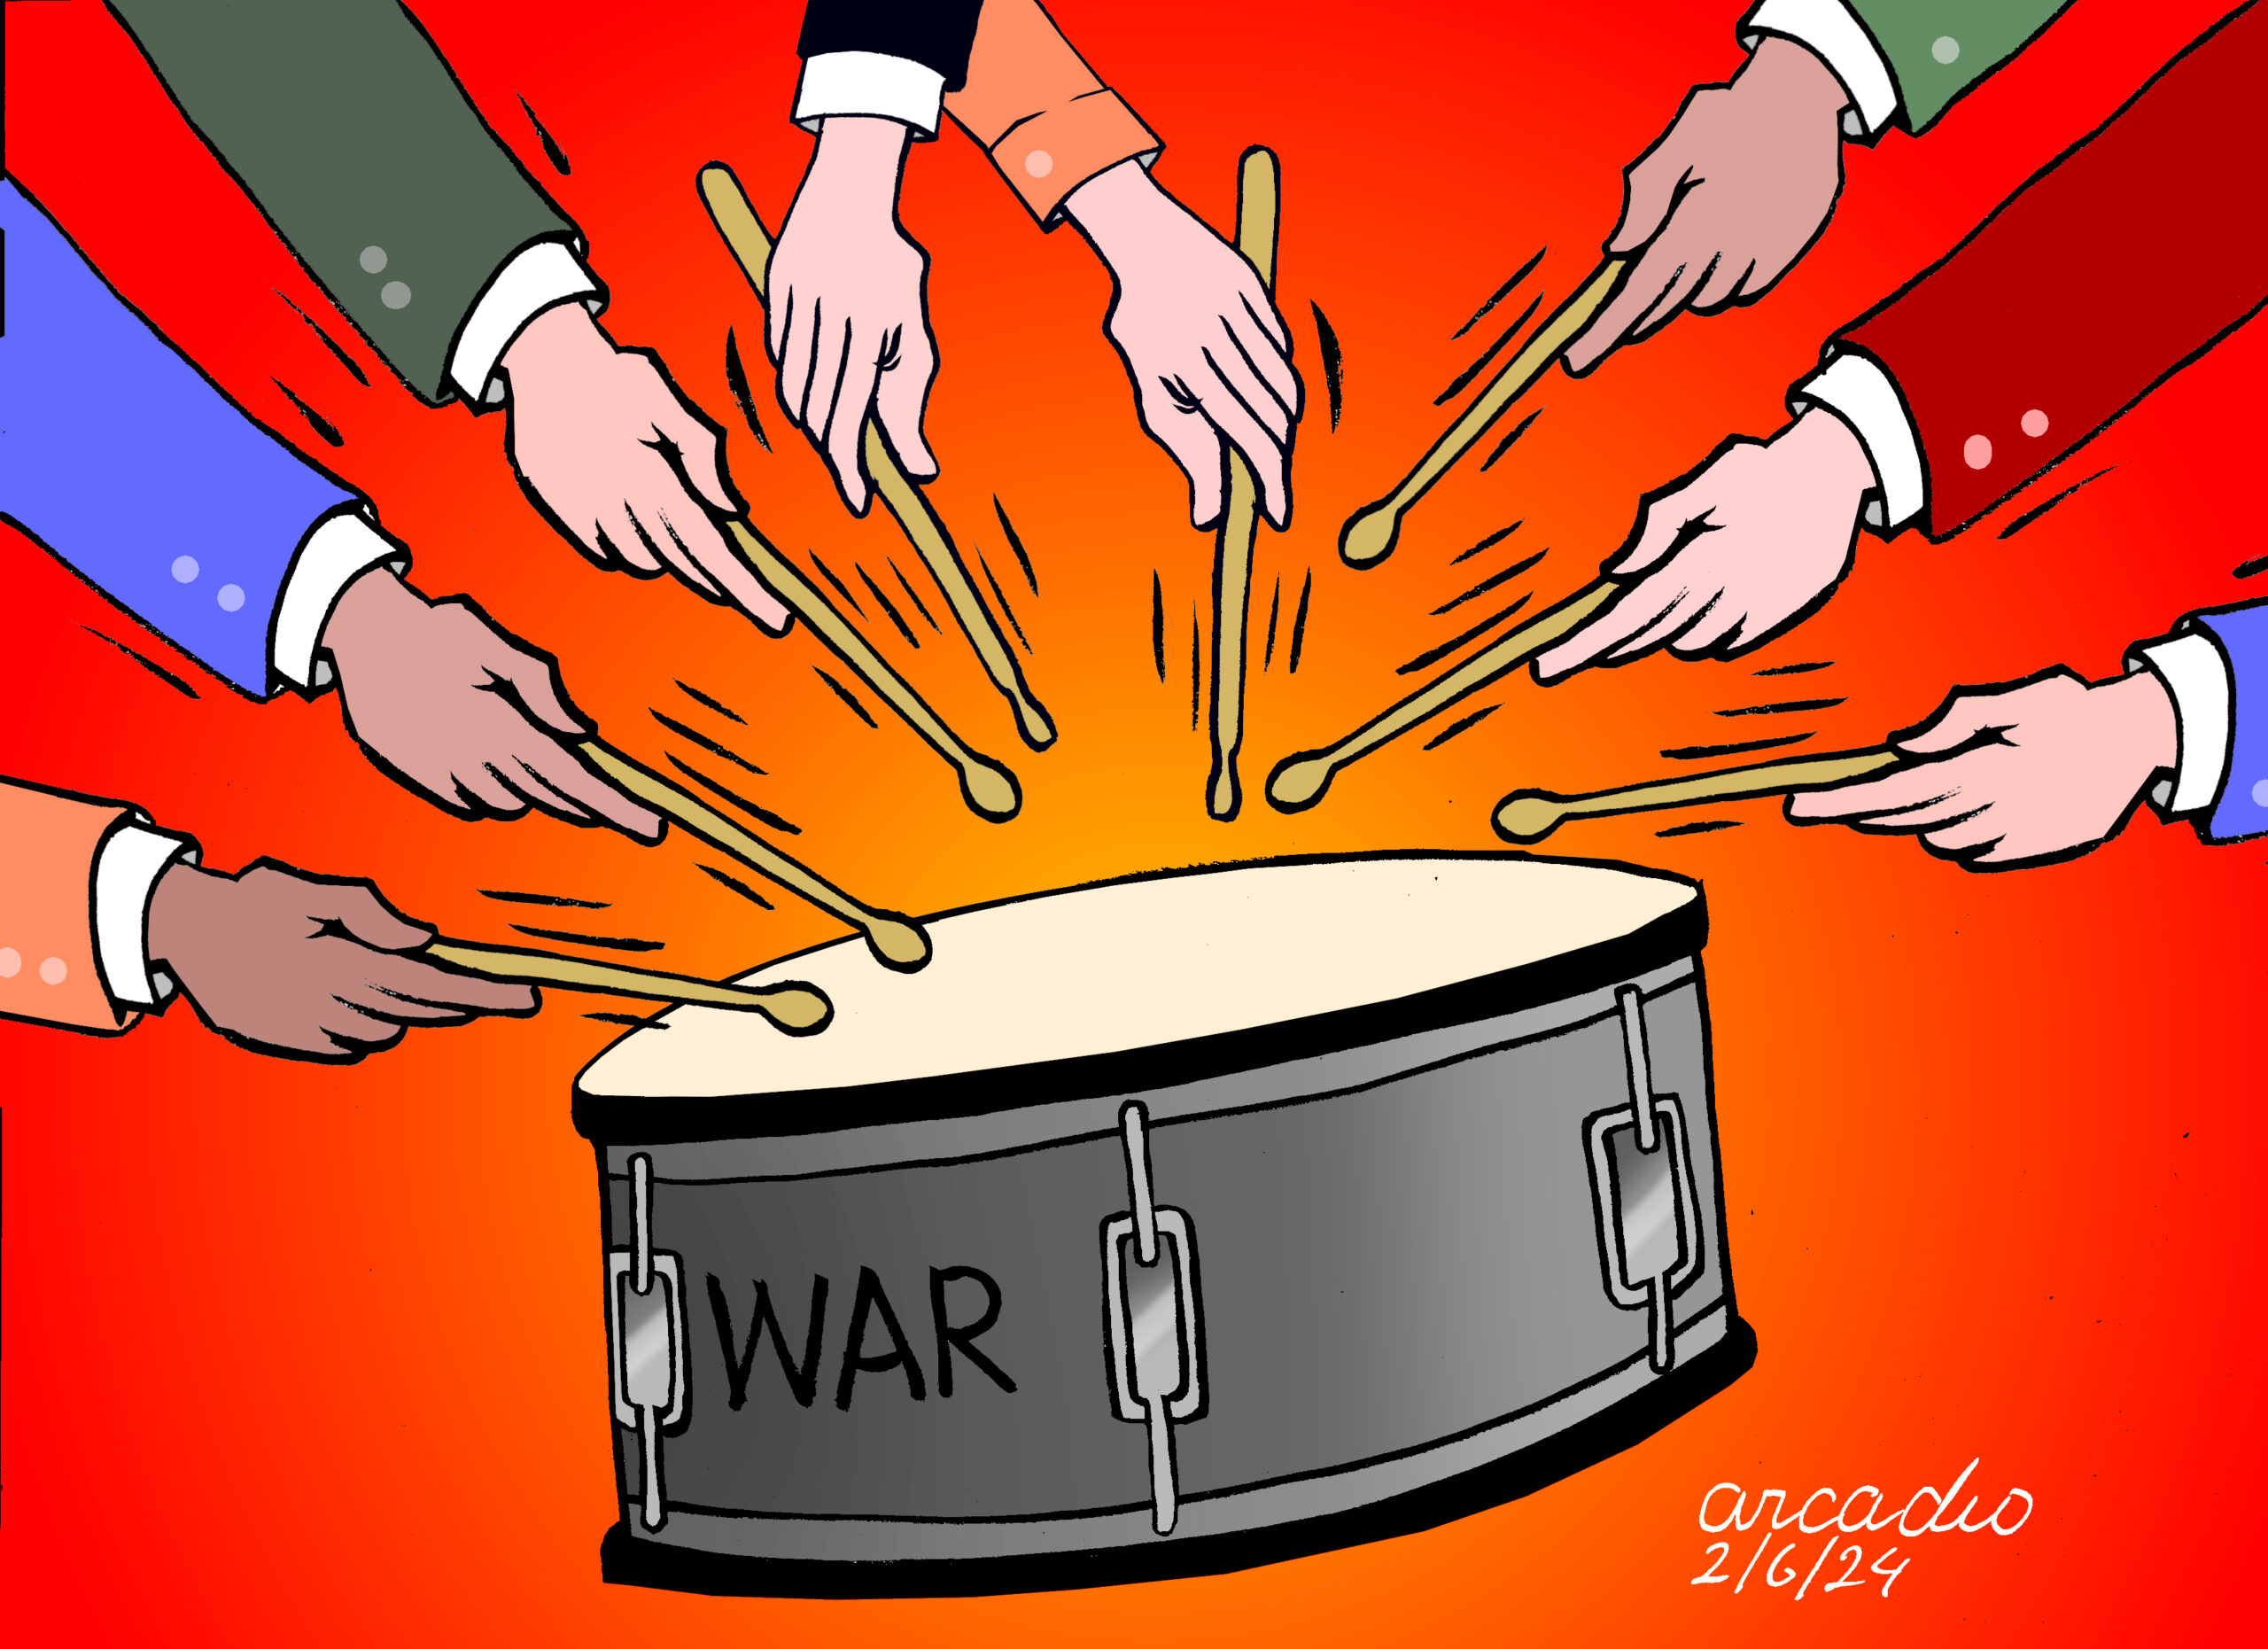 Many Are Playing the Drum Cartoon